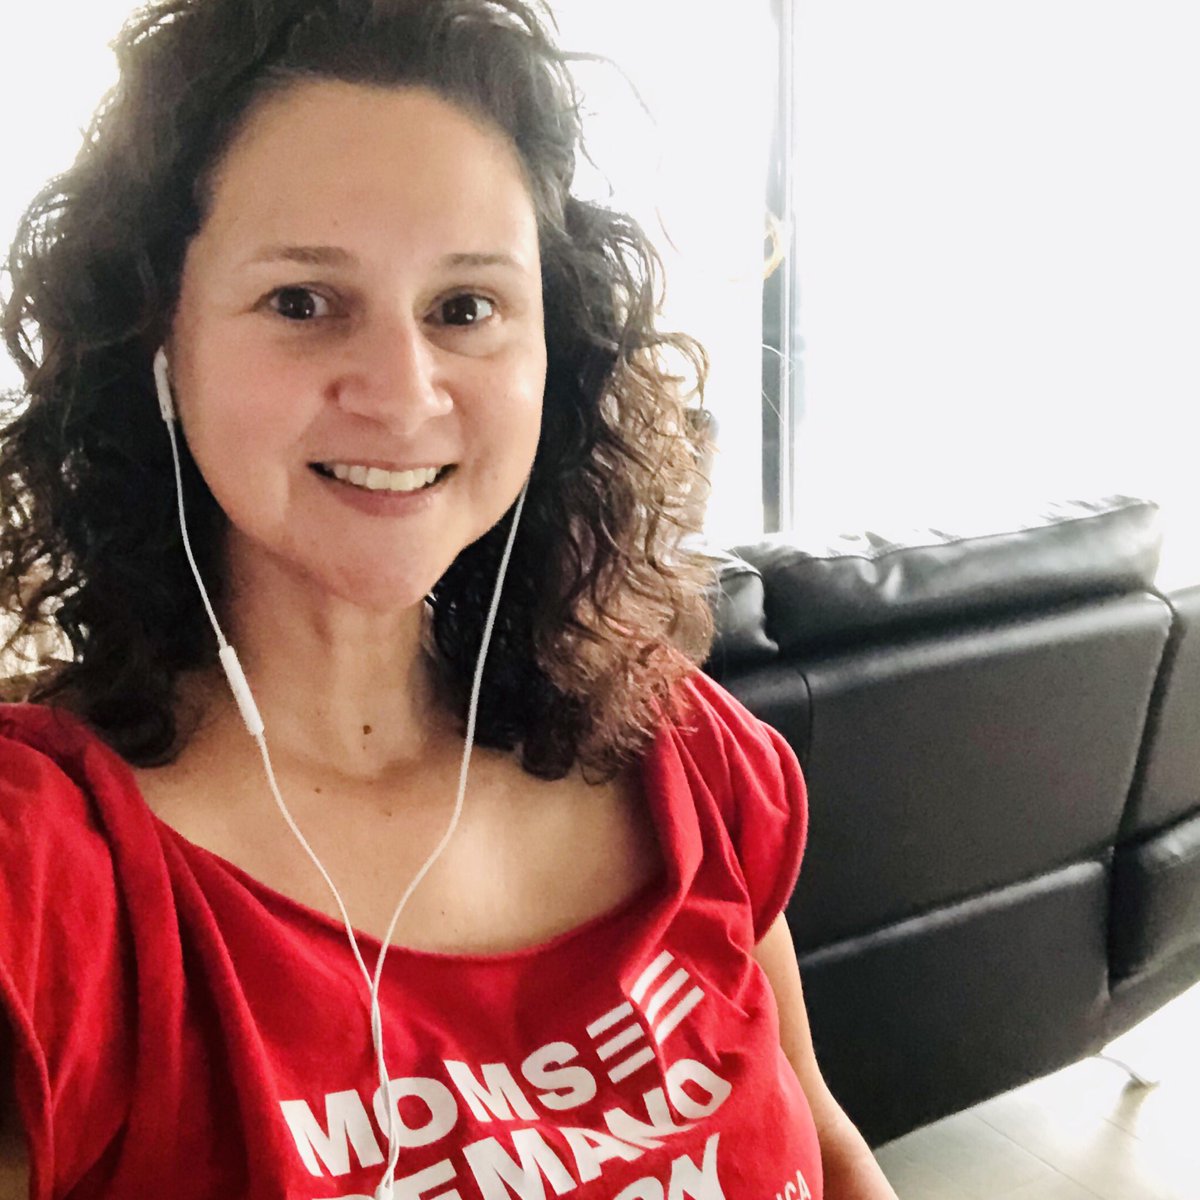 I’ve spent over 80 hours volunteering this election season,  making 4,500 calls & sending 10,000 texts to voters-mostly Texans-to get out the vote. And I’m not done yet. Join me with @MomsDemand & @poweredxpeople for the final stretch. Our democracy is at stake. #GOTV2020 #Vote